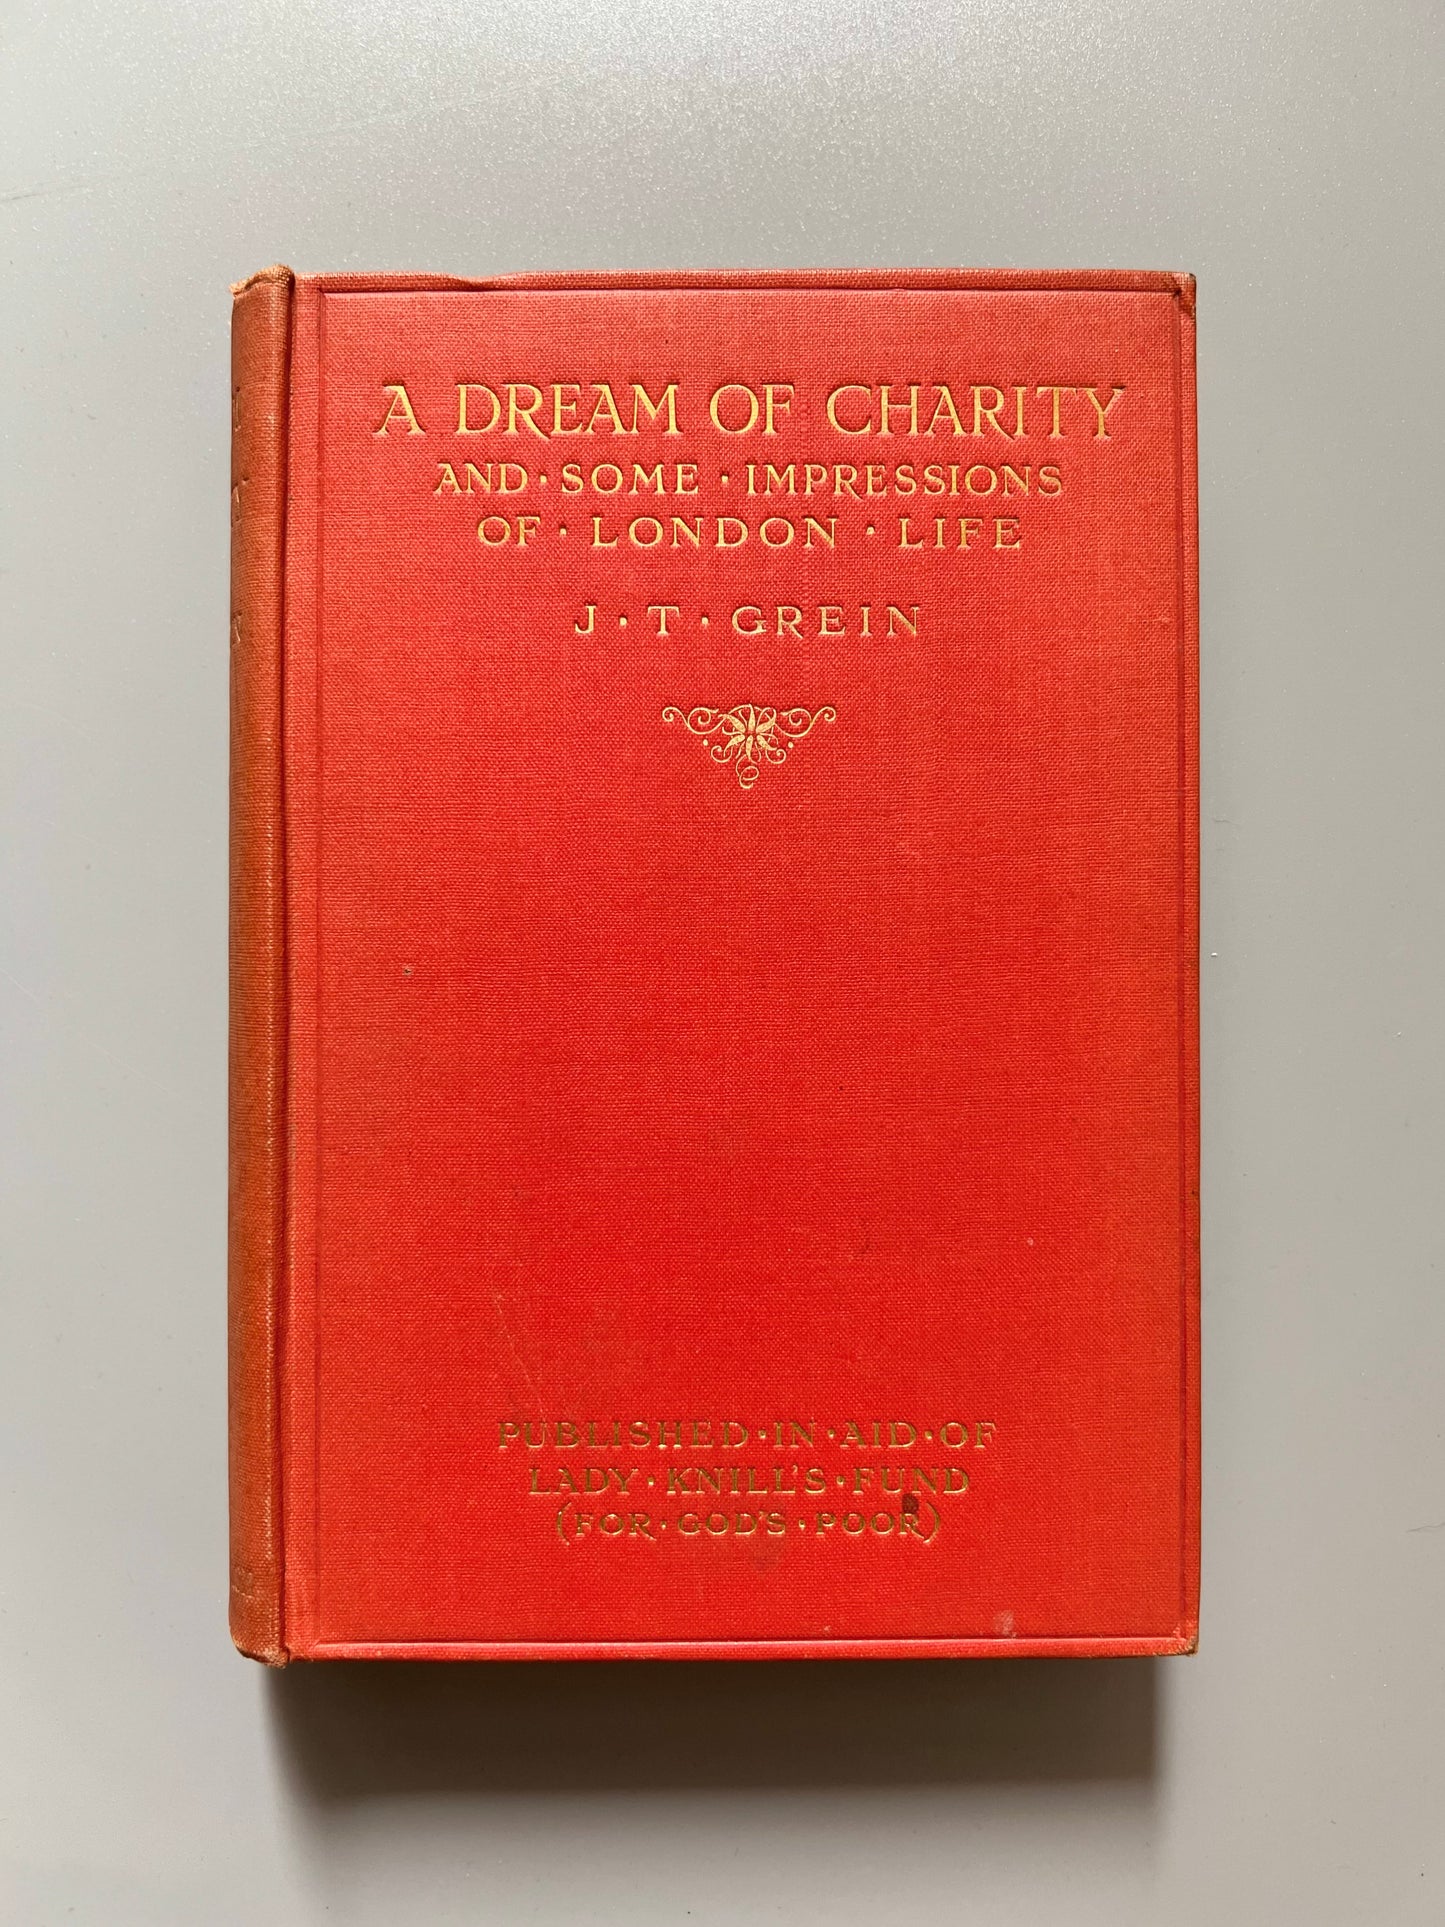 A dream of charity and some impressions of London life, J. T. Grein - Eveleigh Nash, 1910